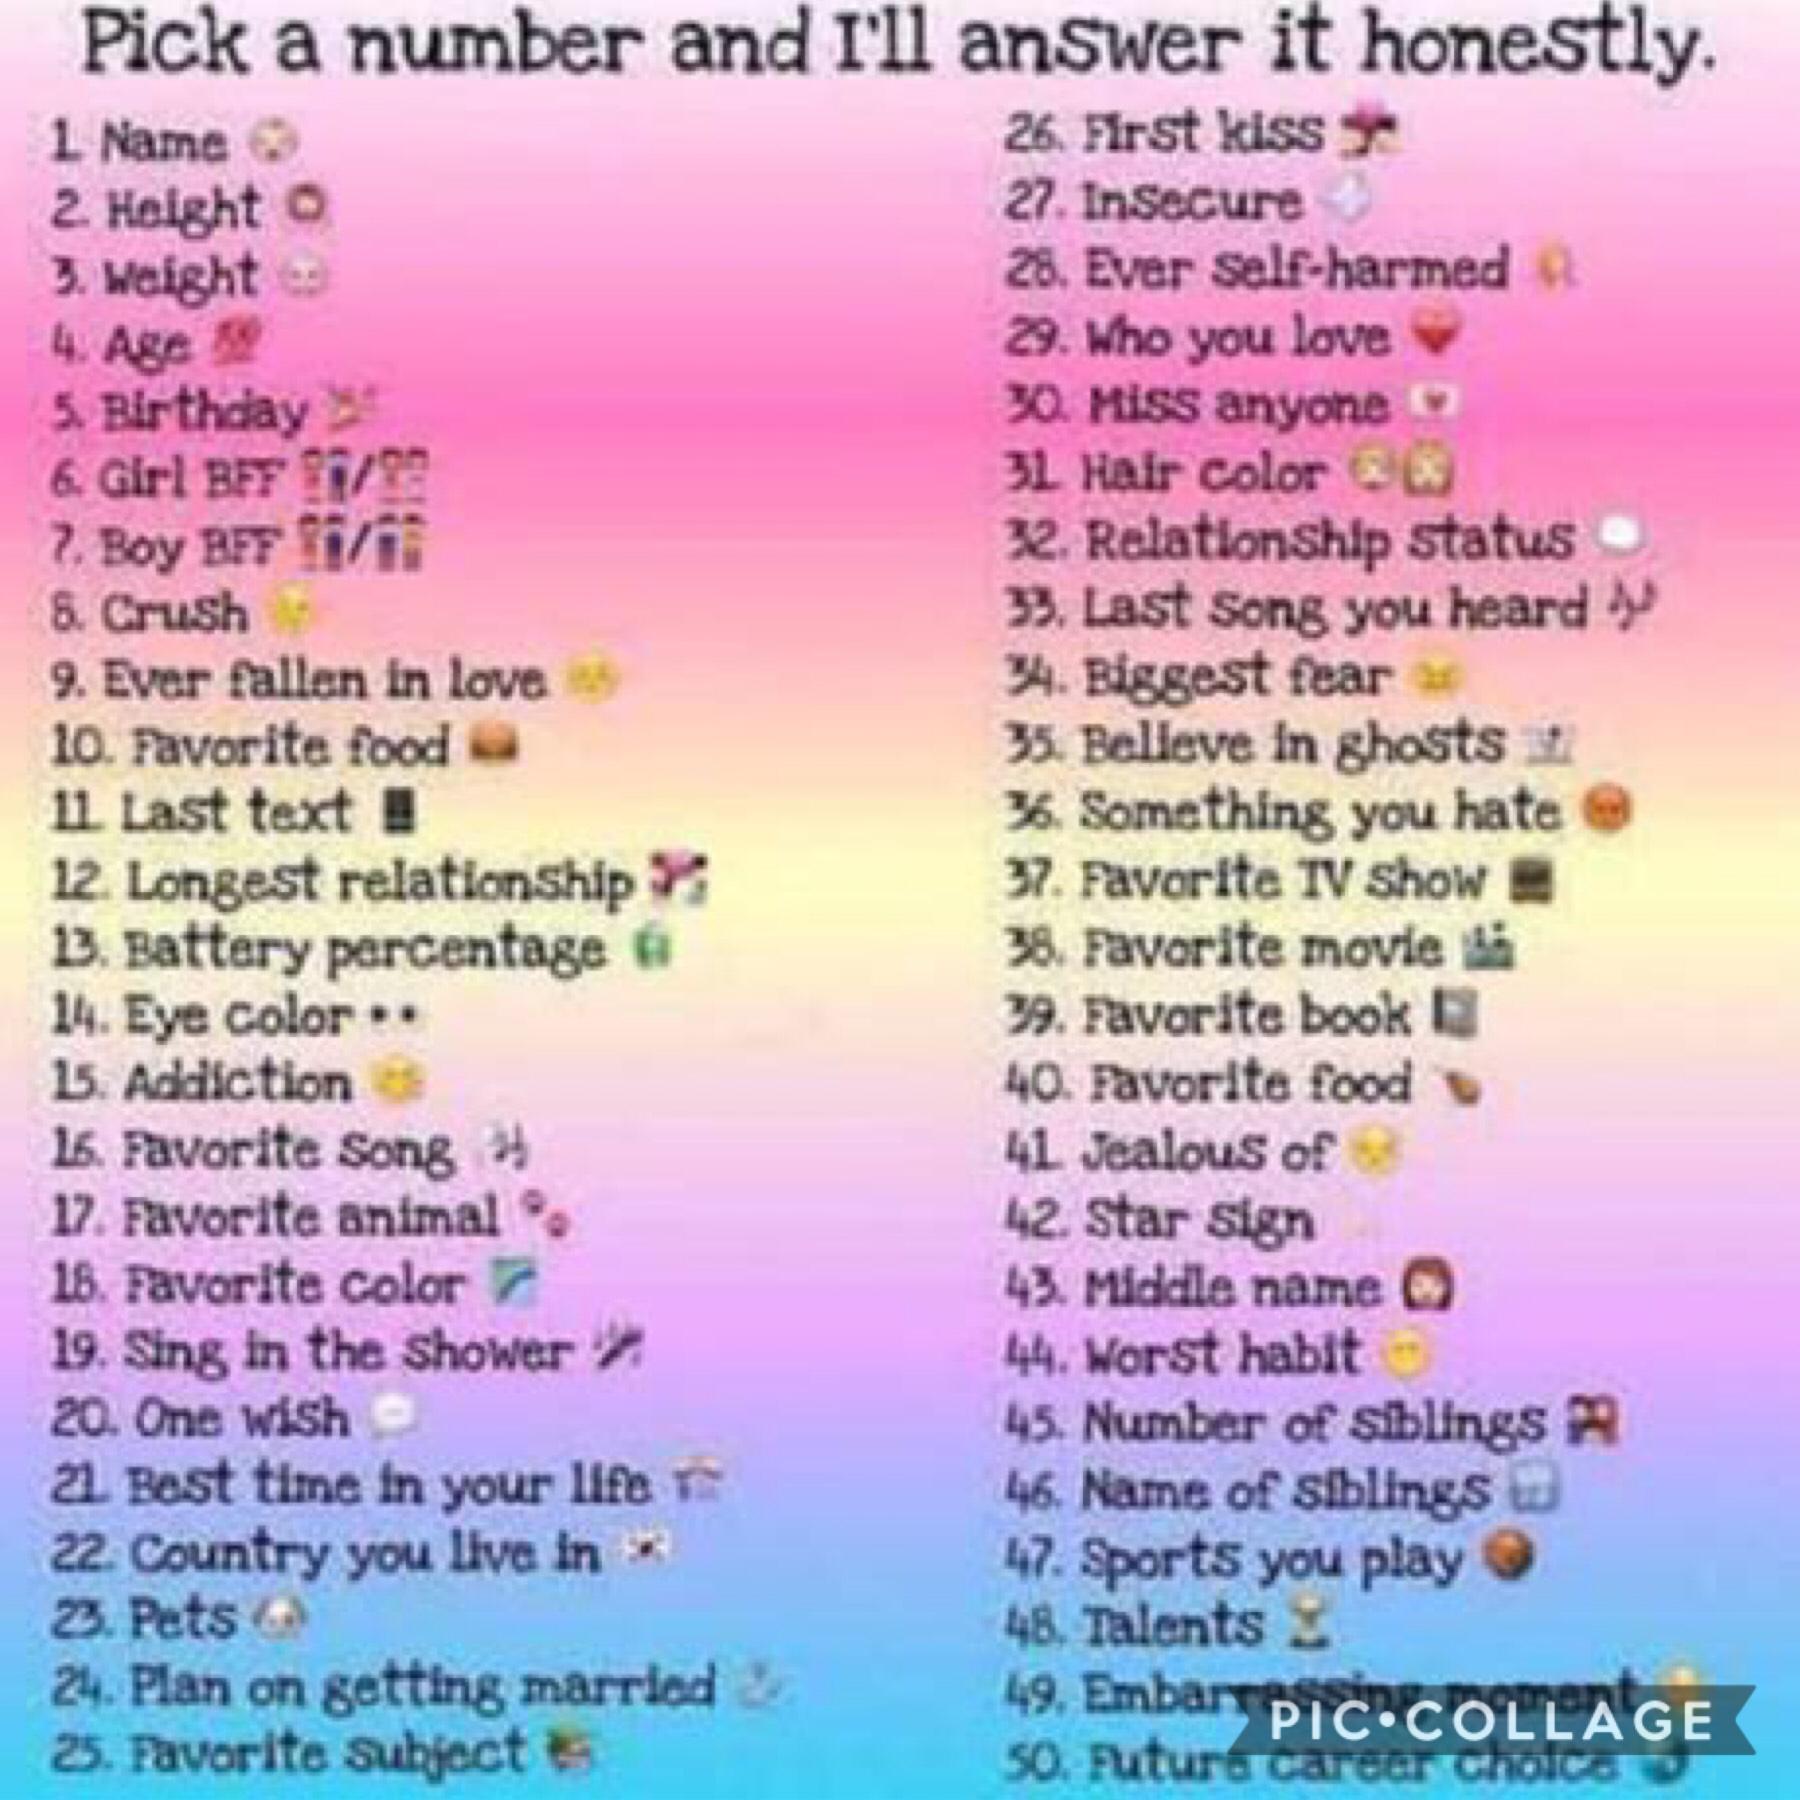 Hey guys pick a number and I'll answer it honestly in the comments pls